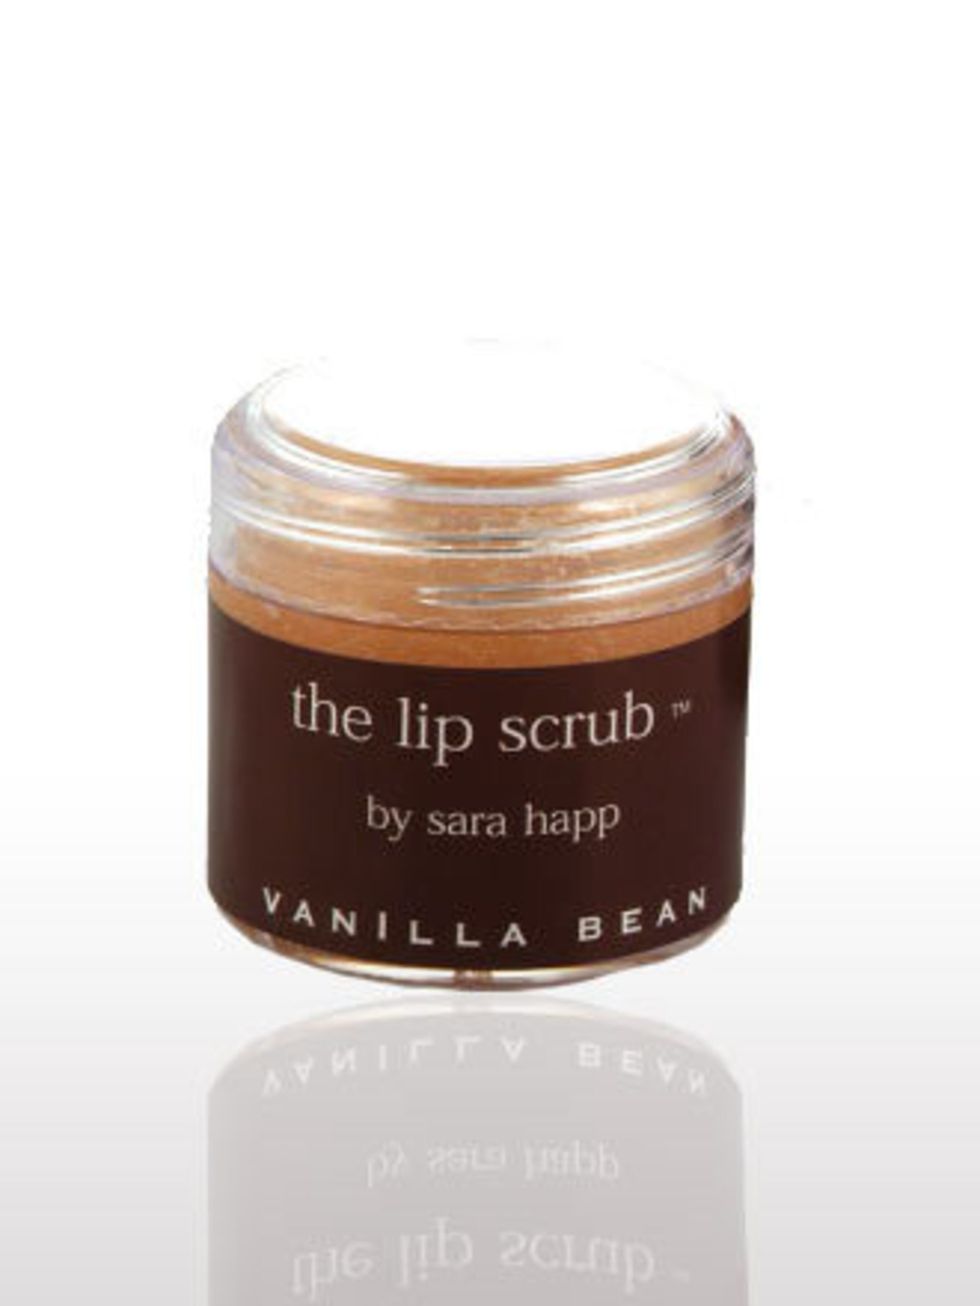 <p> </p><p>The Lip Scrub, £19.95, by <a href="http://sarahapp.co.uk/product.php?productid=3&amp;cat=1&amp;page=1">Sara Happ</a></p><p> </p><p>This sugar and cinnamon lip exfoliator is a celebrity staple  even Kate Moss loves it. Use it to create a smooth